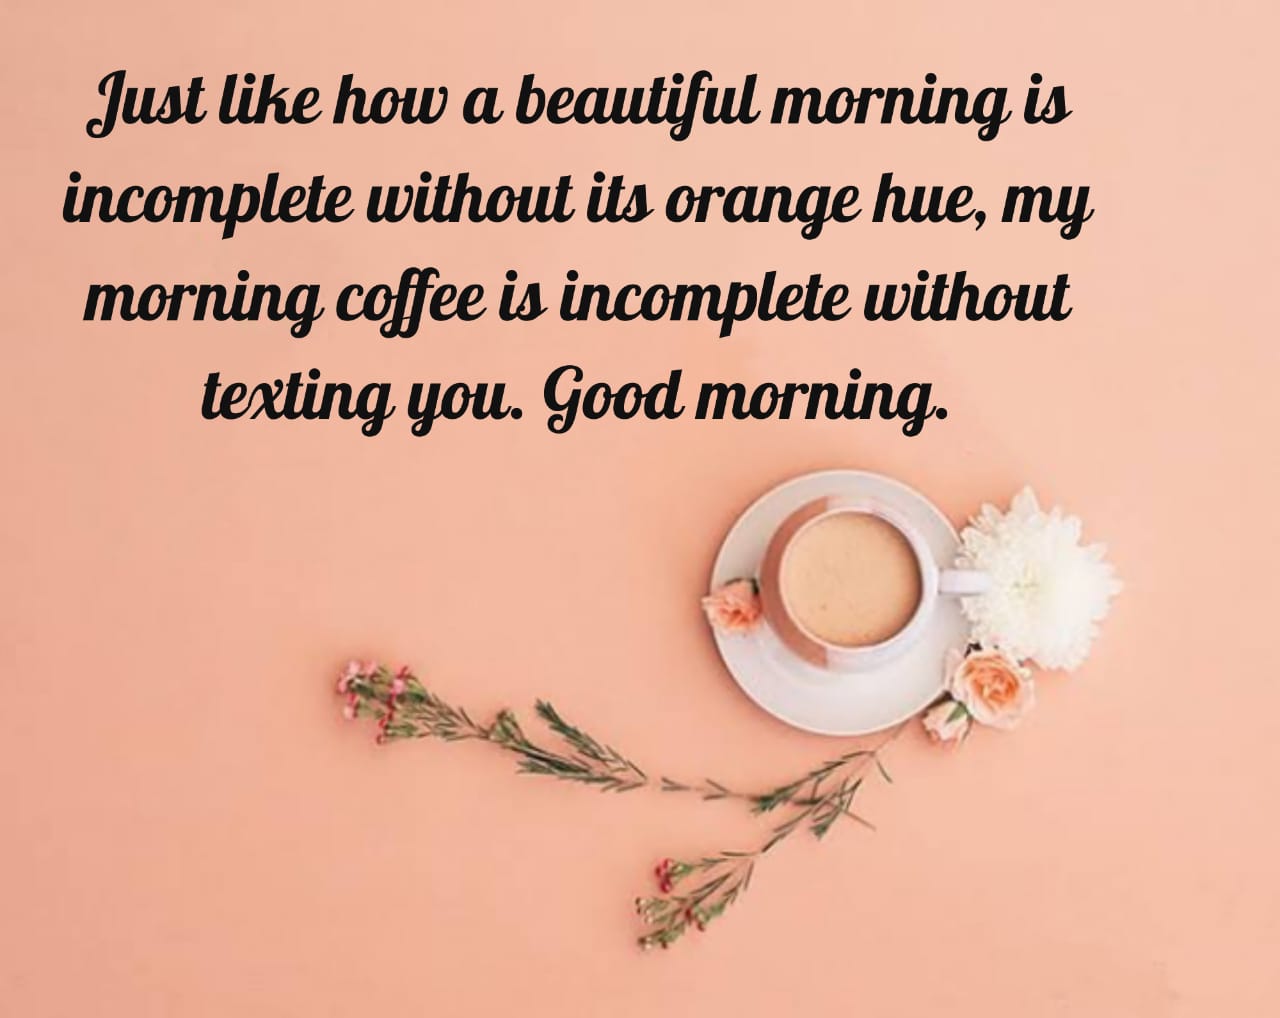 Good Morning Poetry For Her